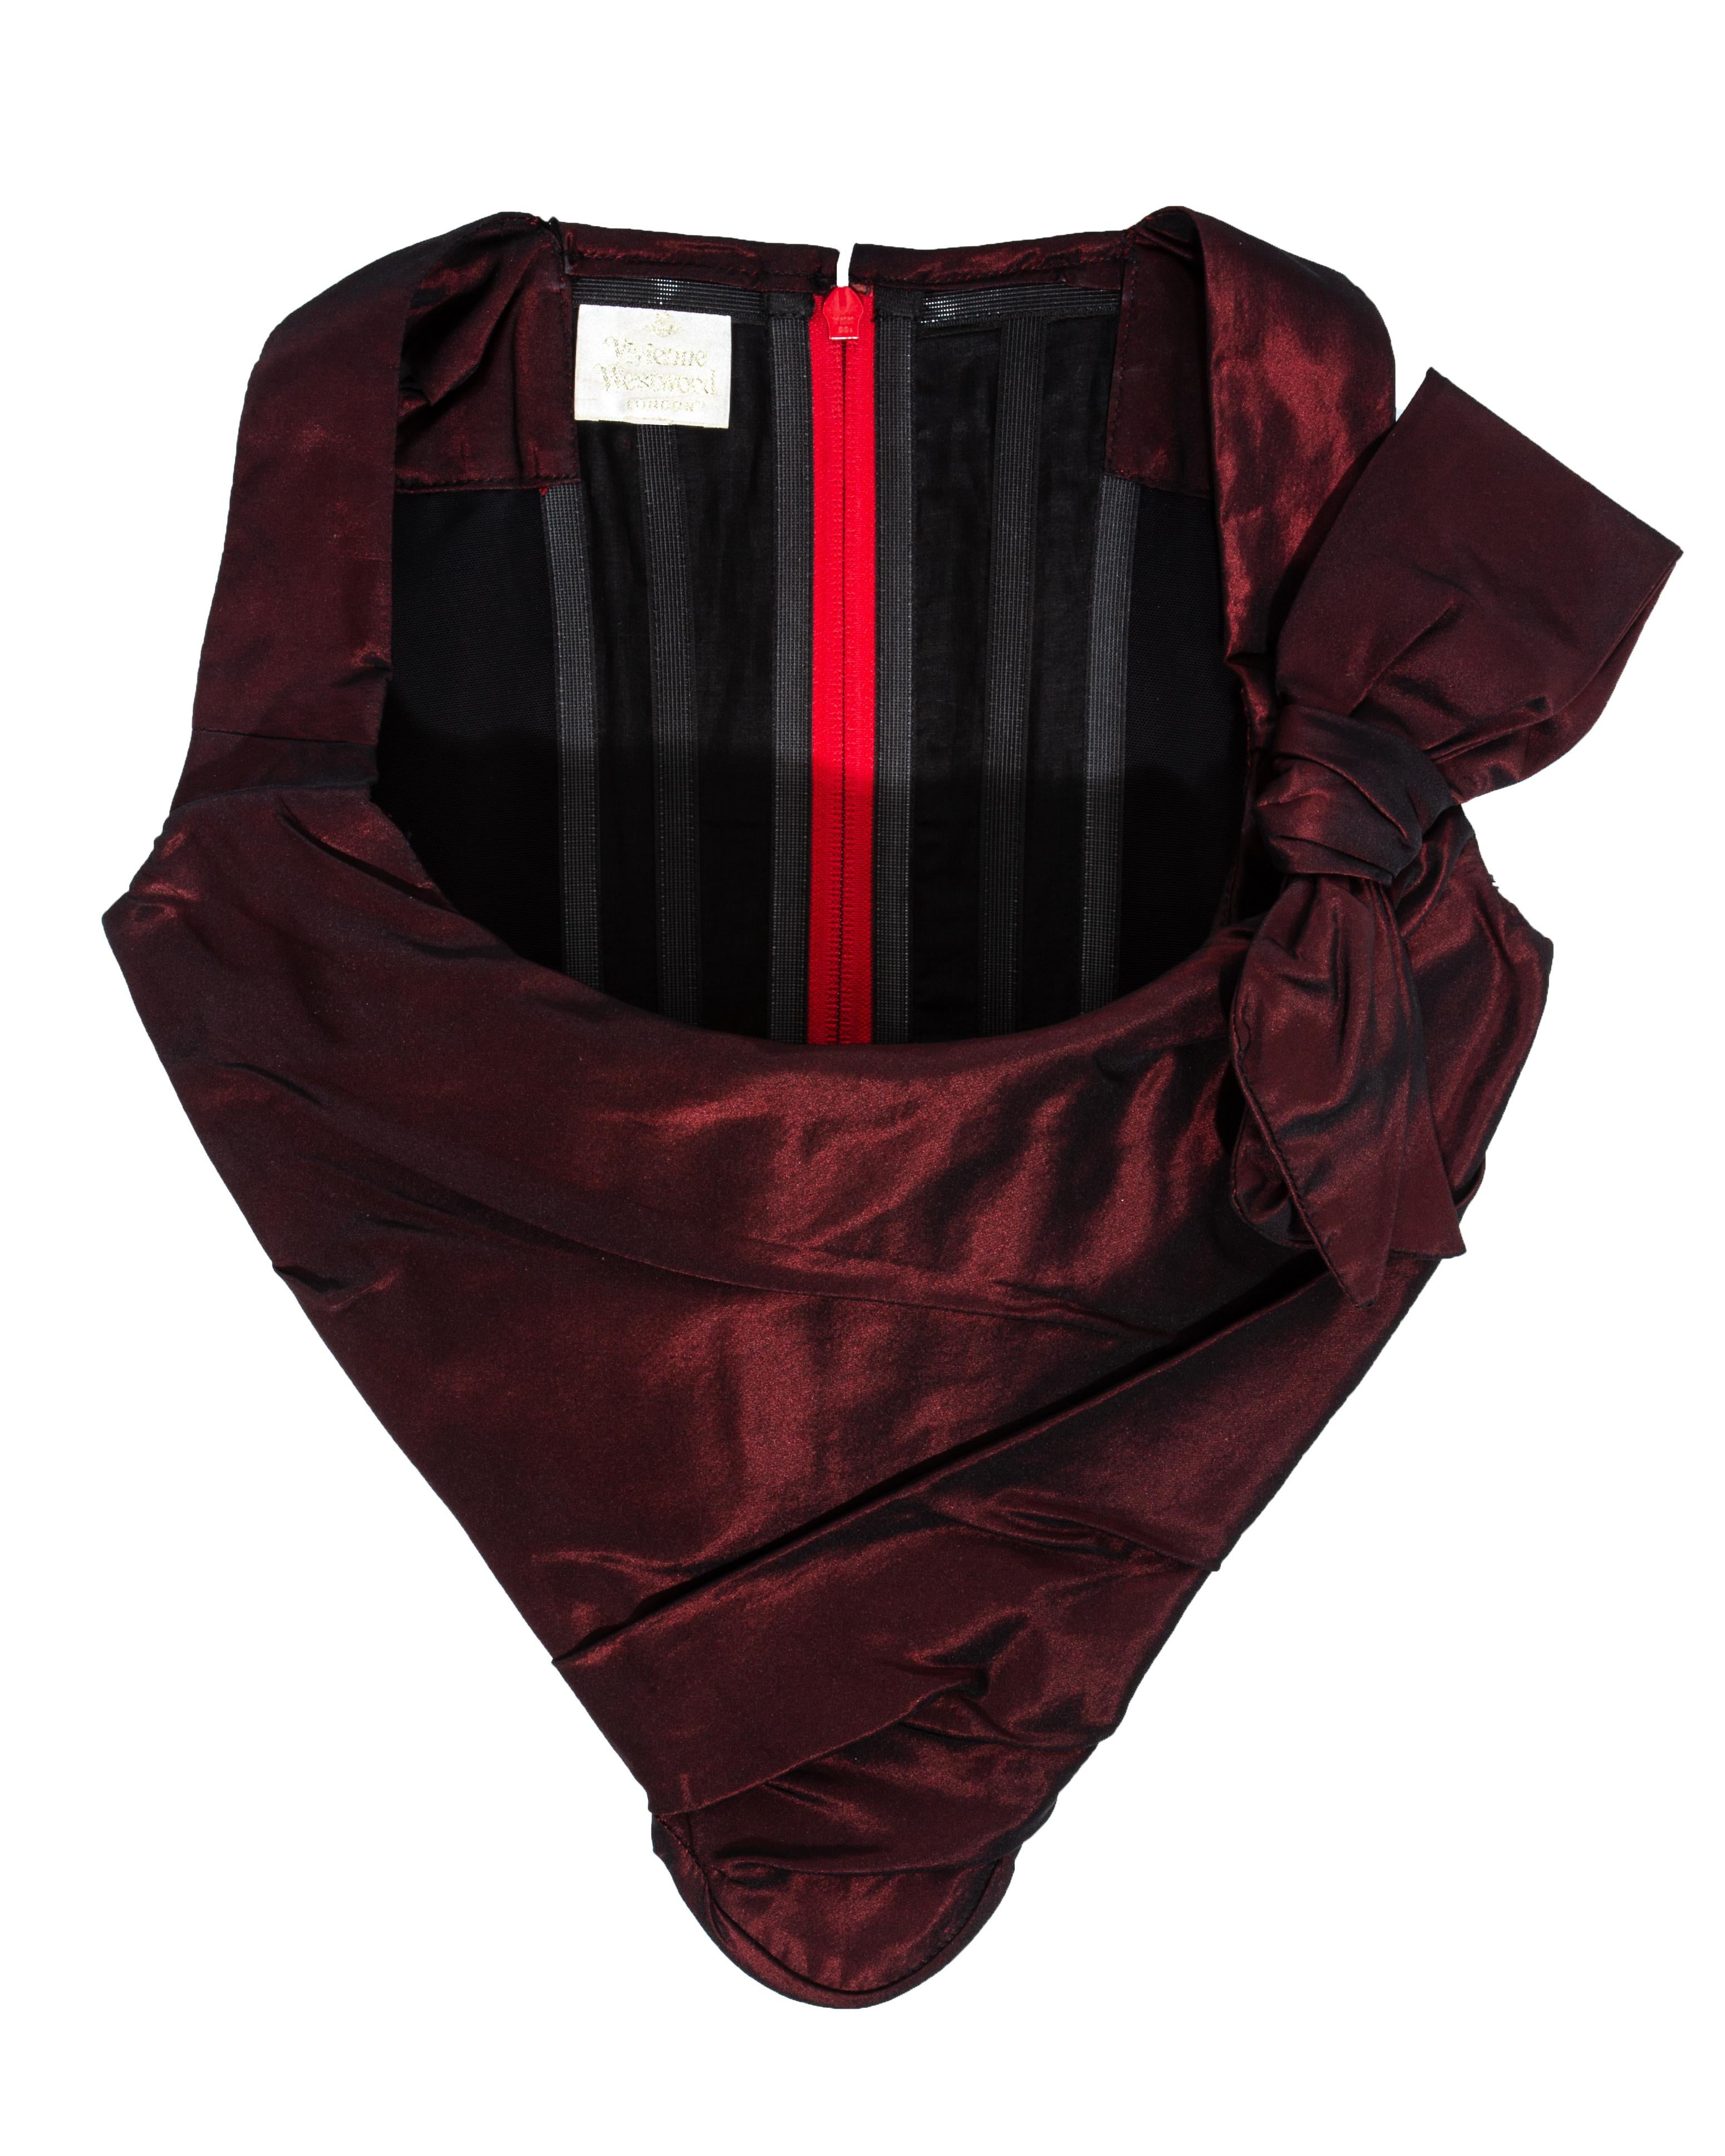 Black Vivienne Westwood Couture red taffeta corset and skirt evening ensemble, fw 1996